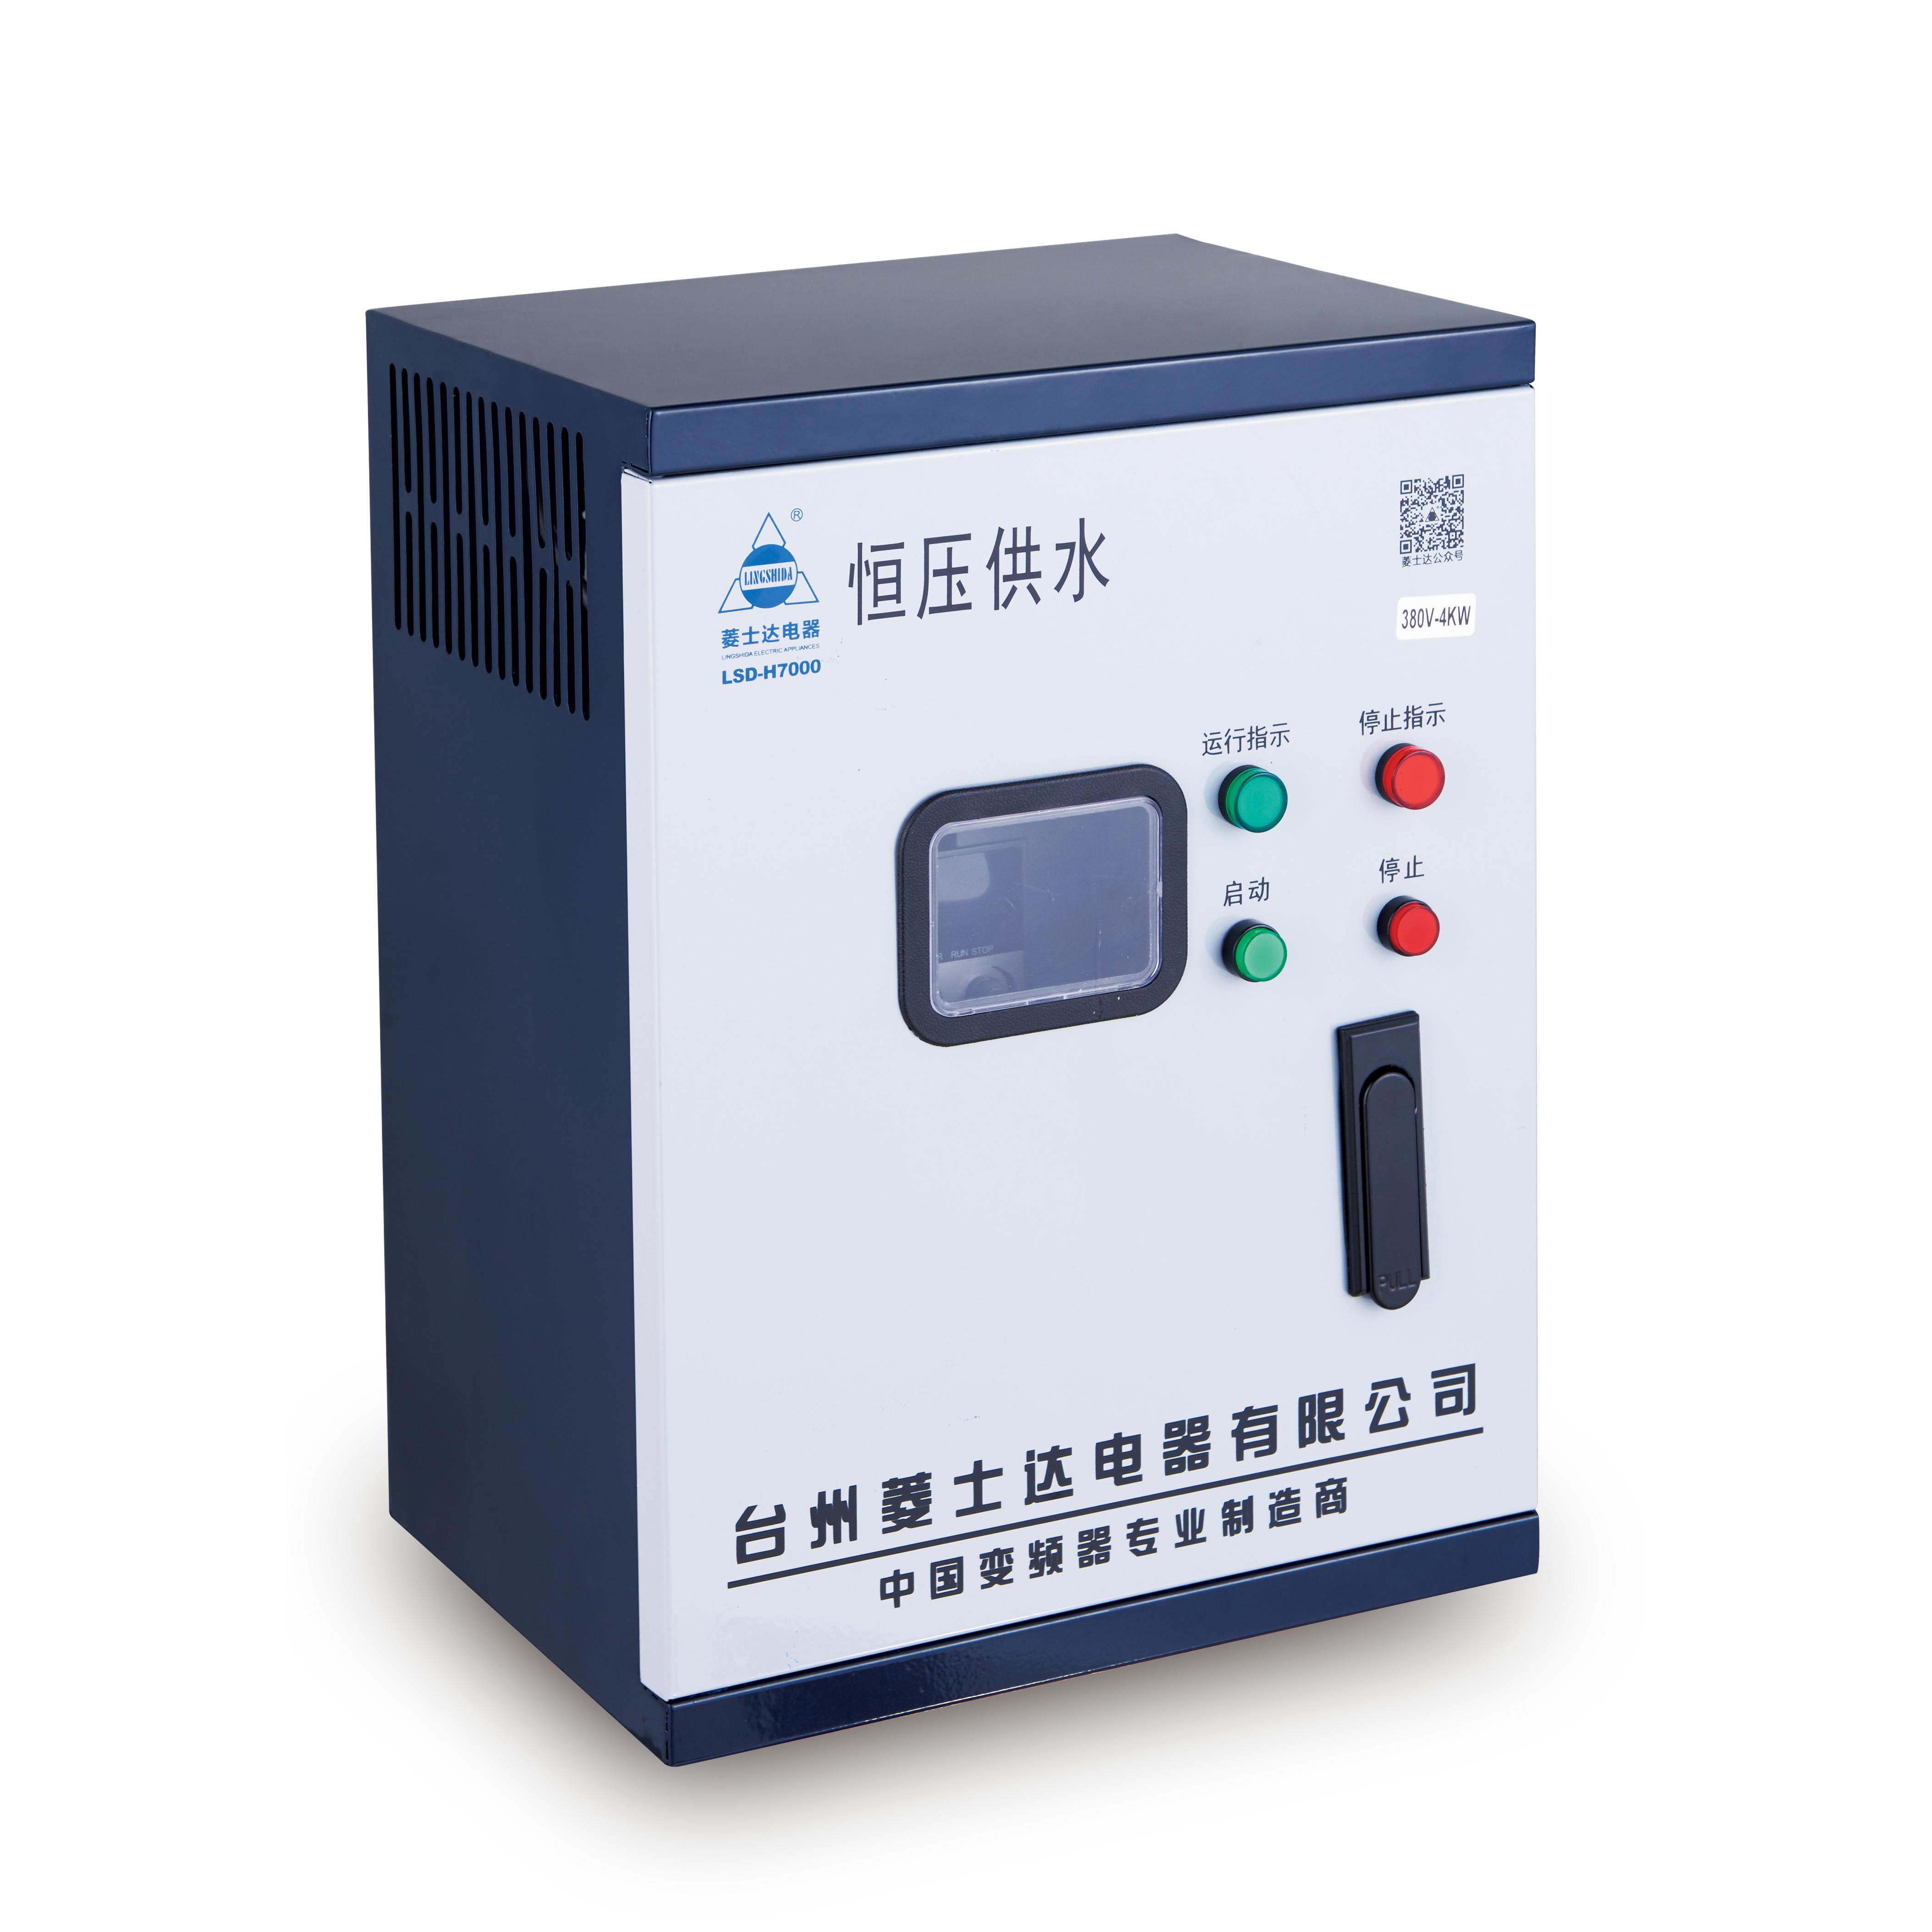 The LSD-H7000 frequency converter is an expert in energy efficiency improvement and achieving constant pressure water supply